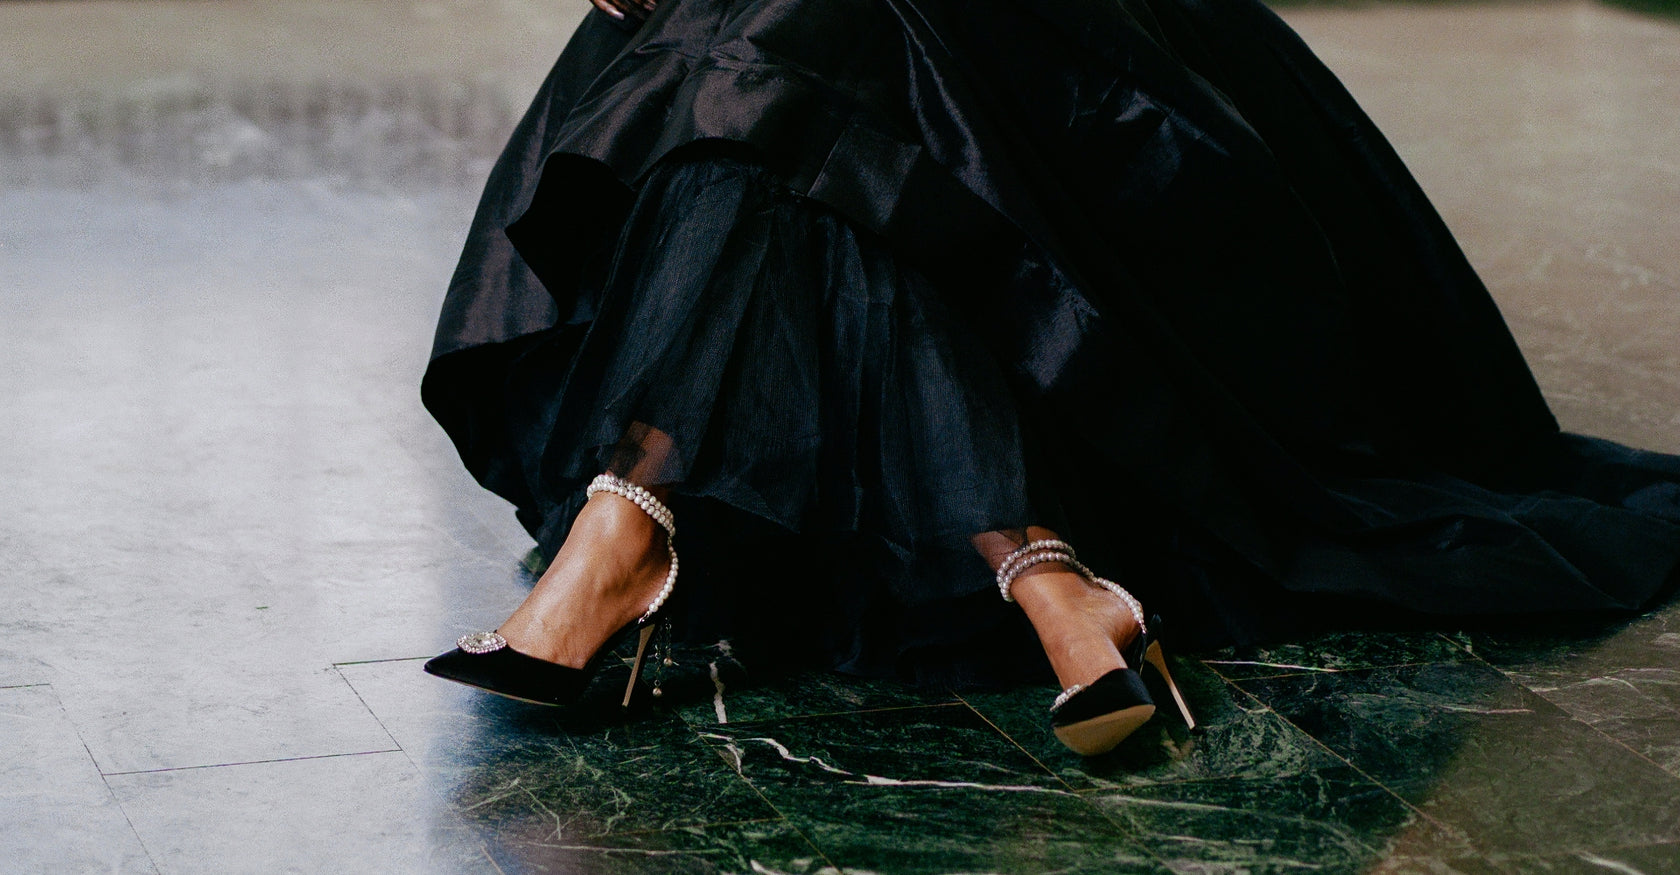 Zena Ziora luxury footwear capsule collection: The Dame pearl stiletto heel with crystal rectangular diamond embellishment in black satin. Model wearing shoes with legs crossed. Black formal ballgown in view.